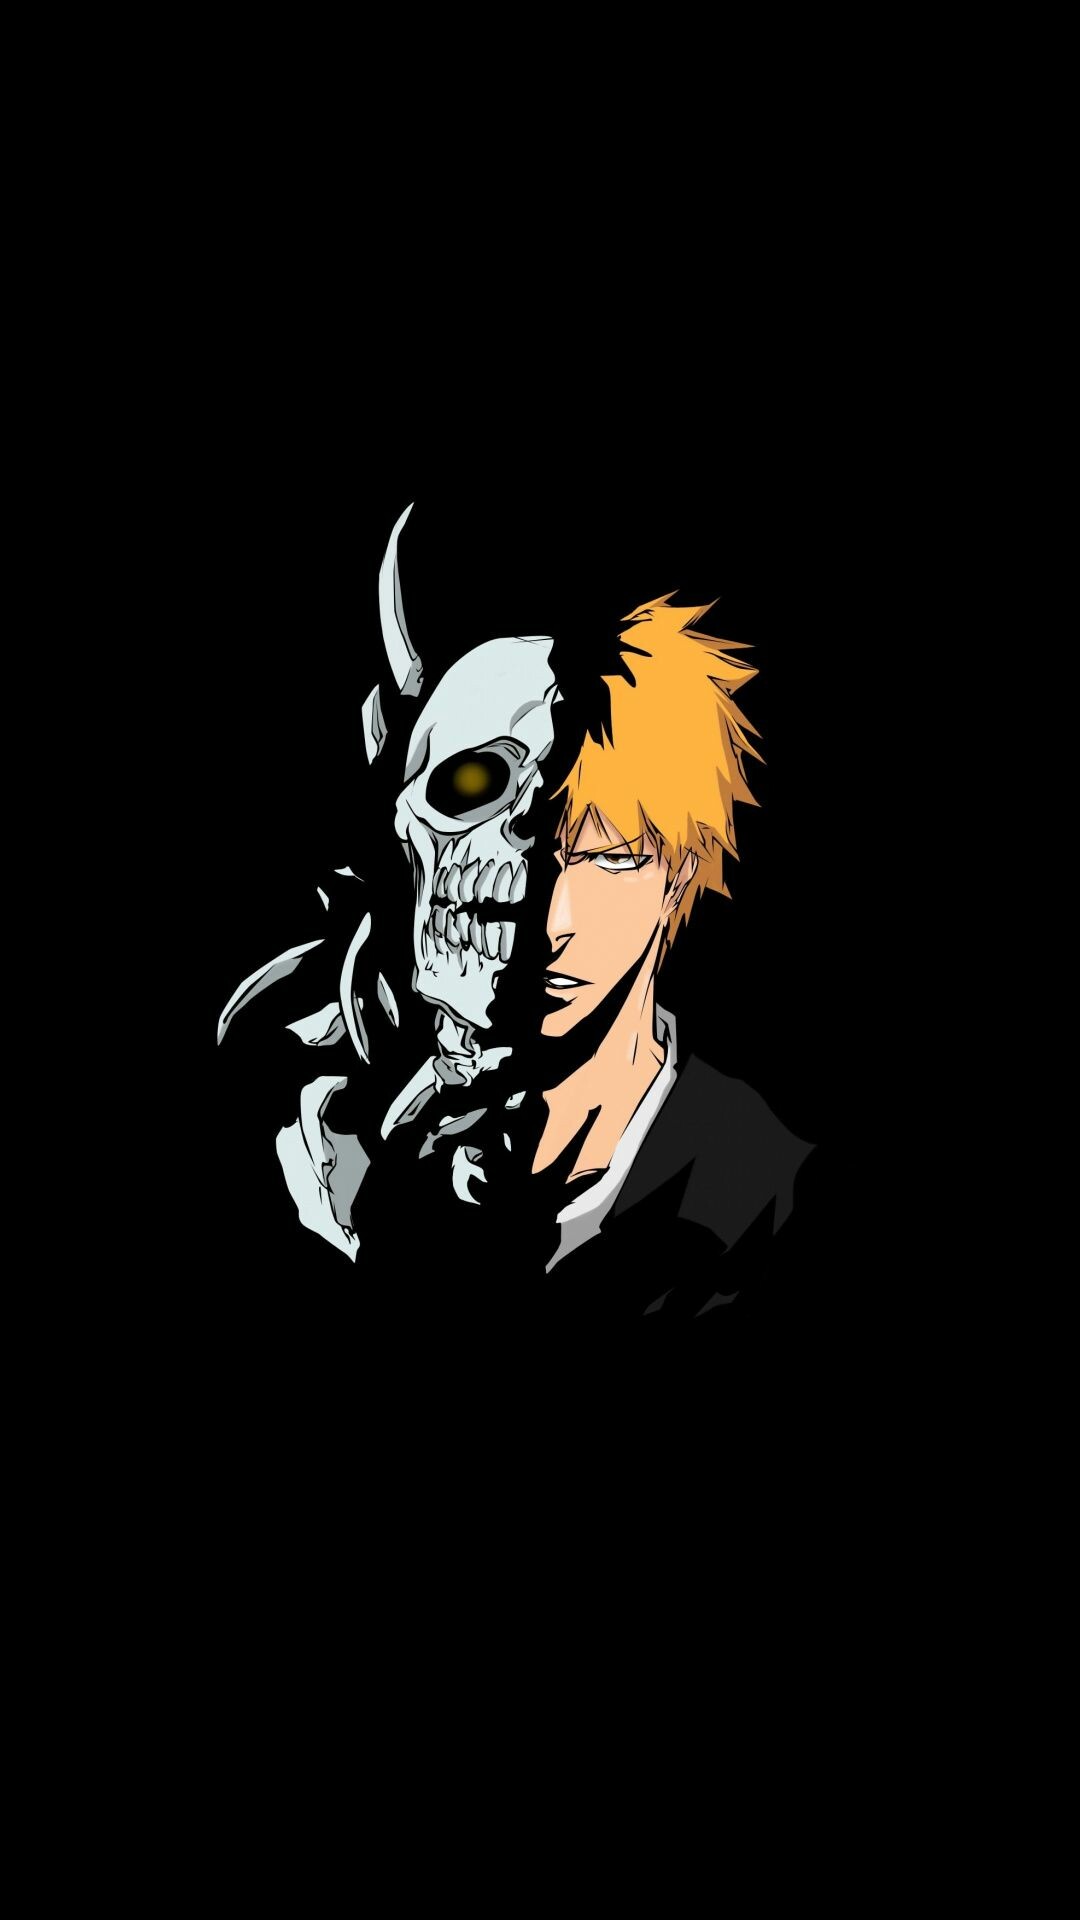 Bleach: The series premiered in Japan on TV Tokyo on October 5, 2004. 1080x1920 Full HD Background.